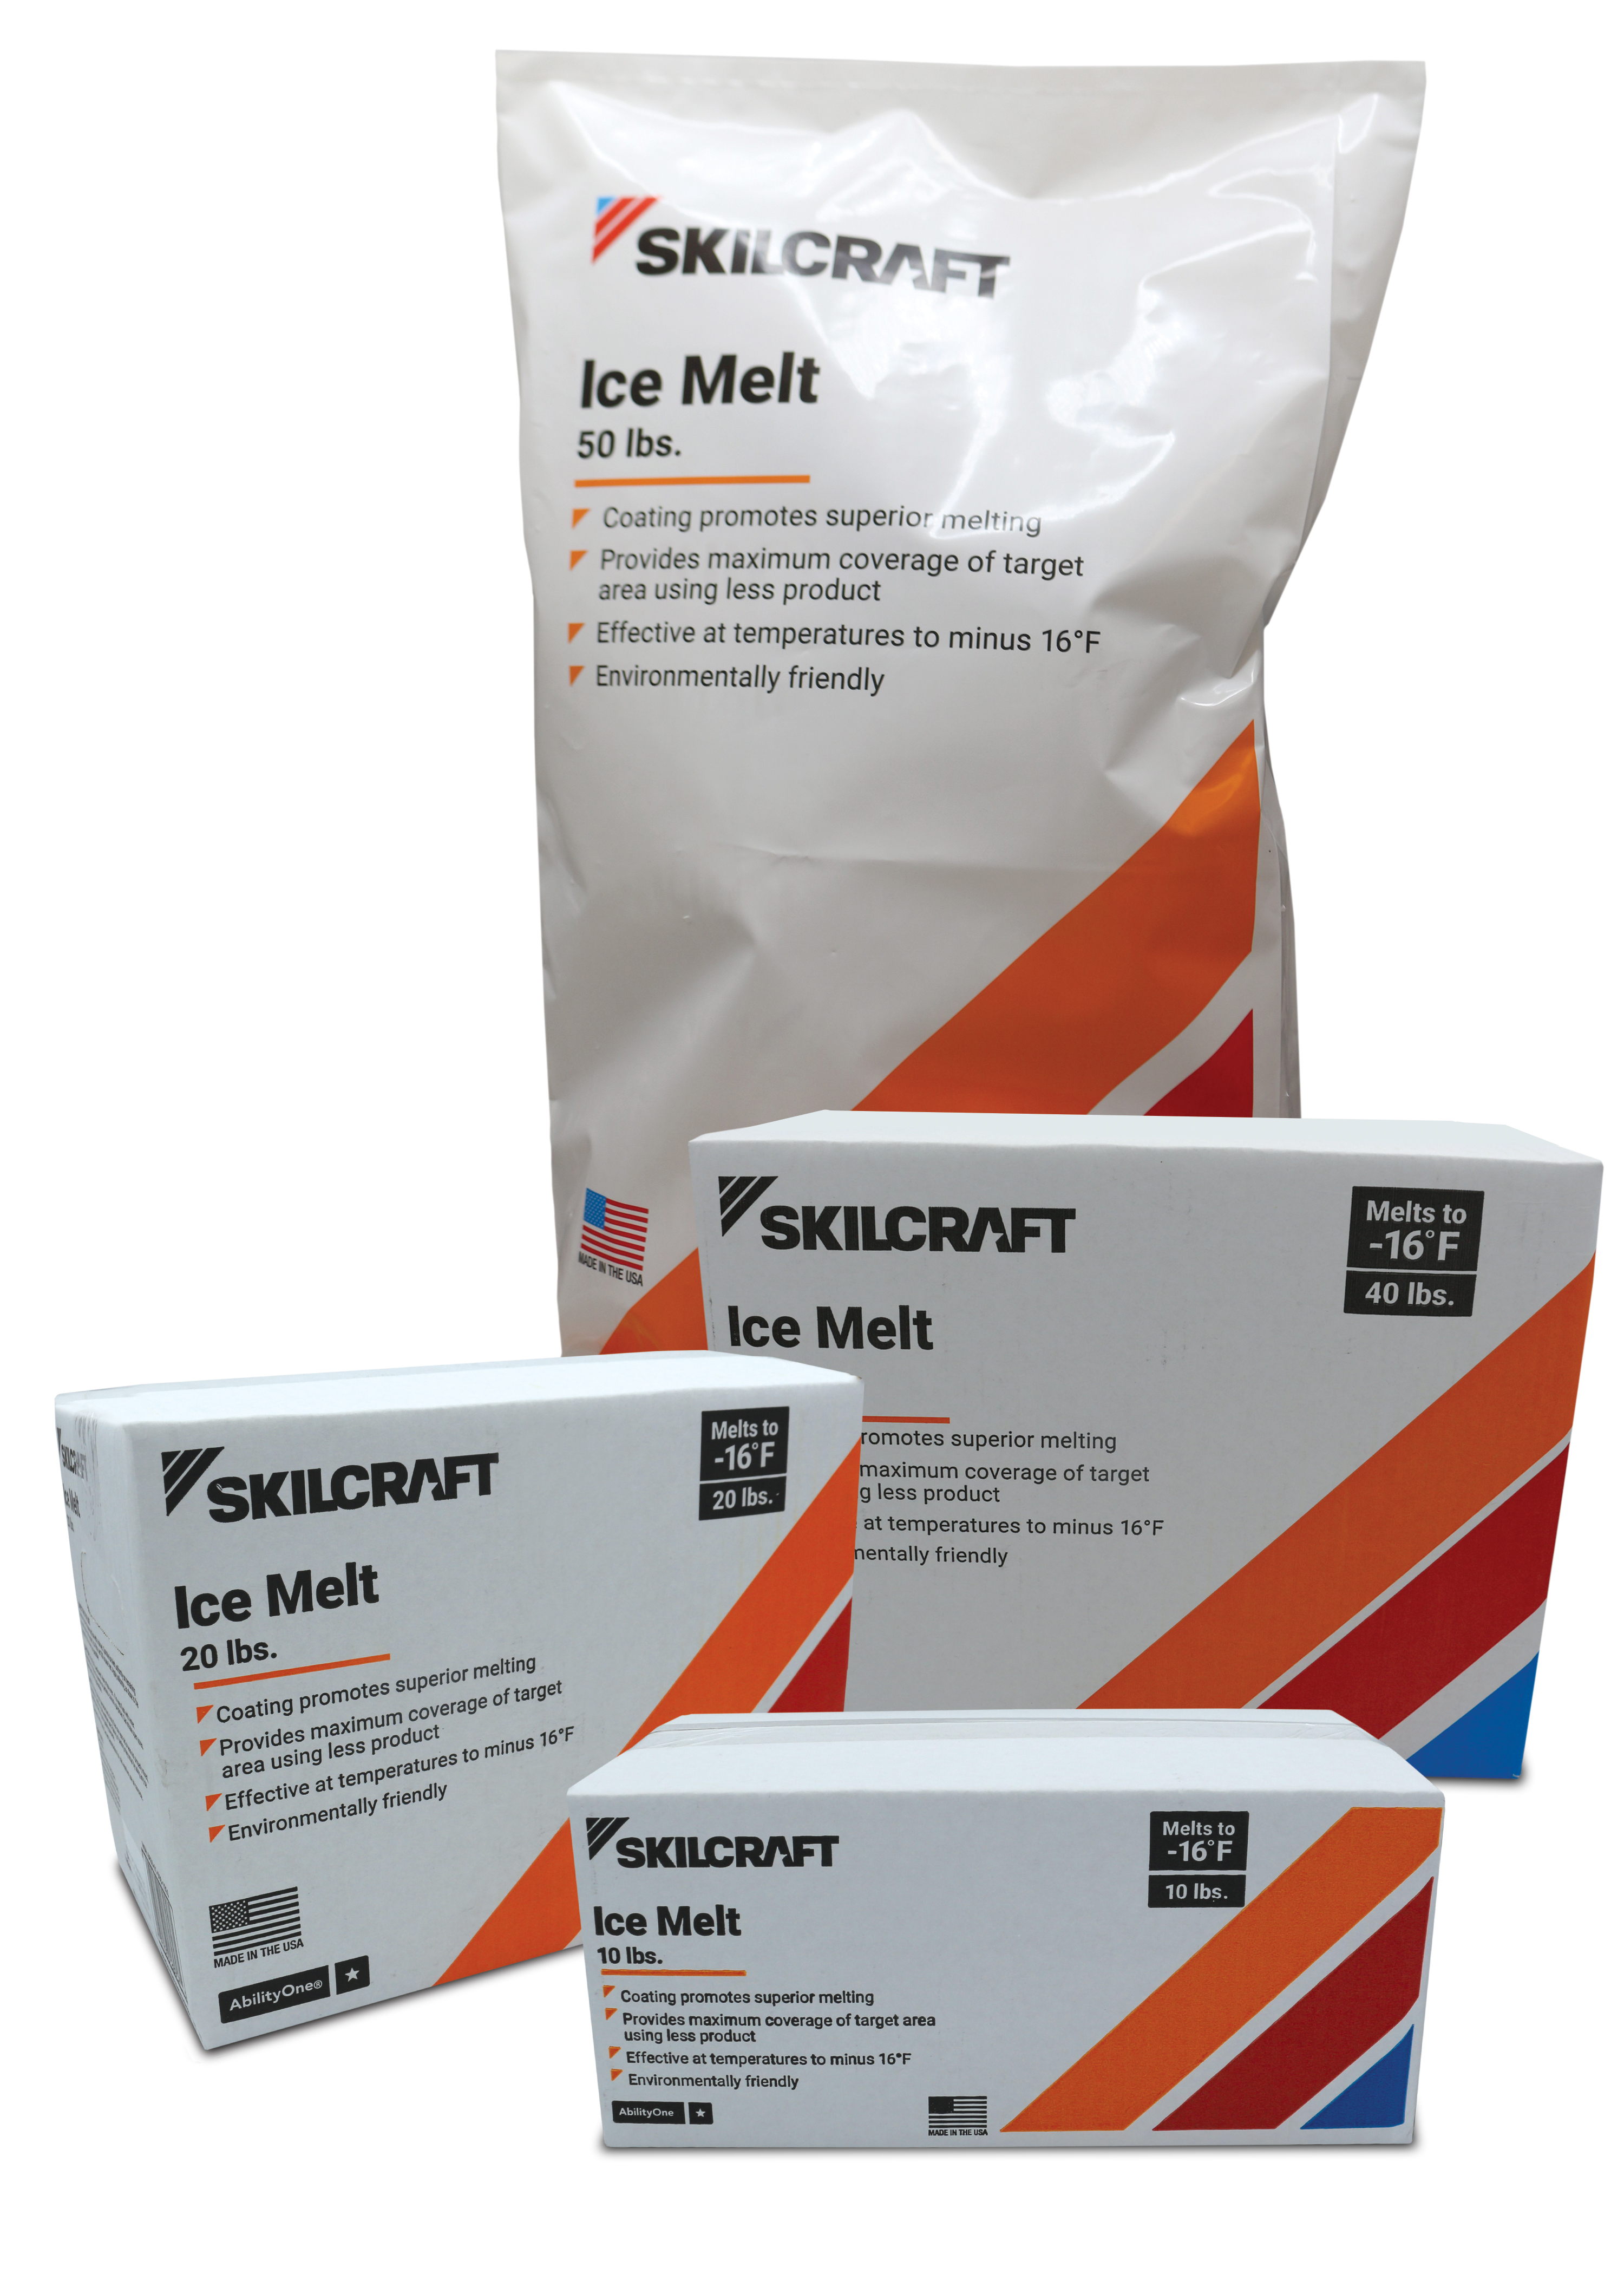 Image of three boxes and a bag of ice melt